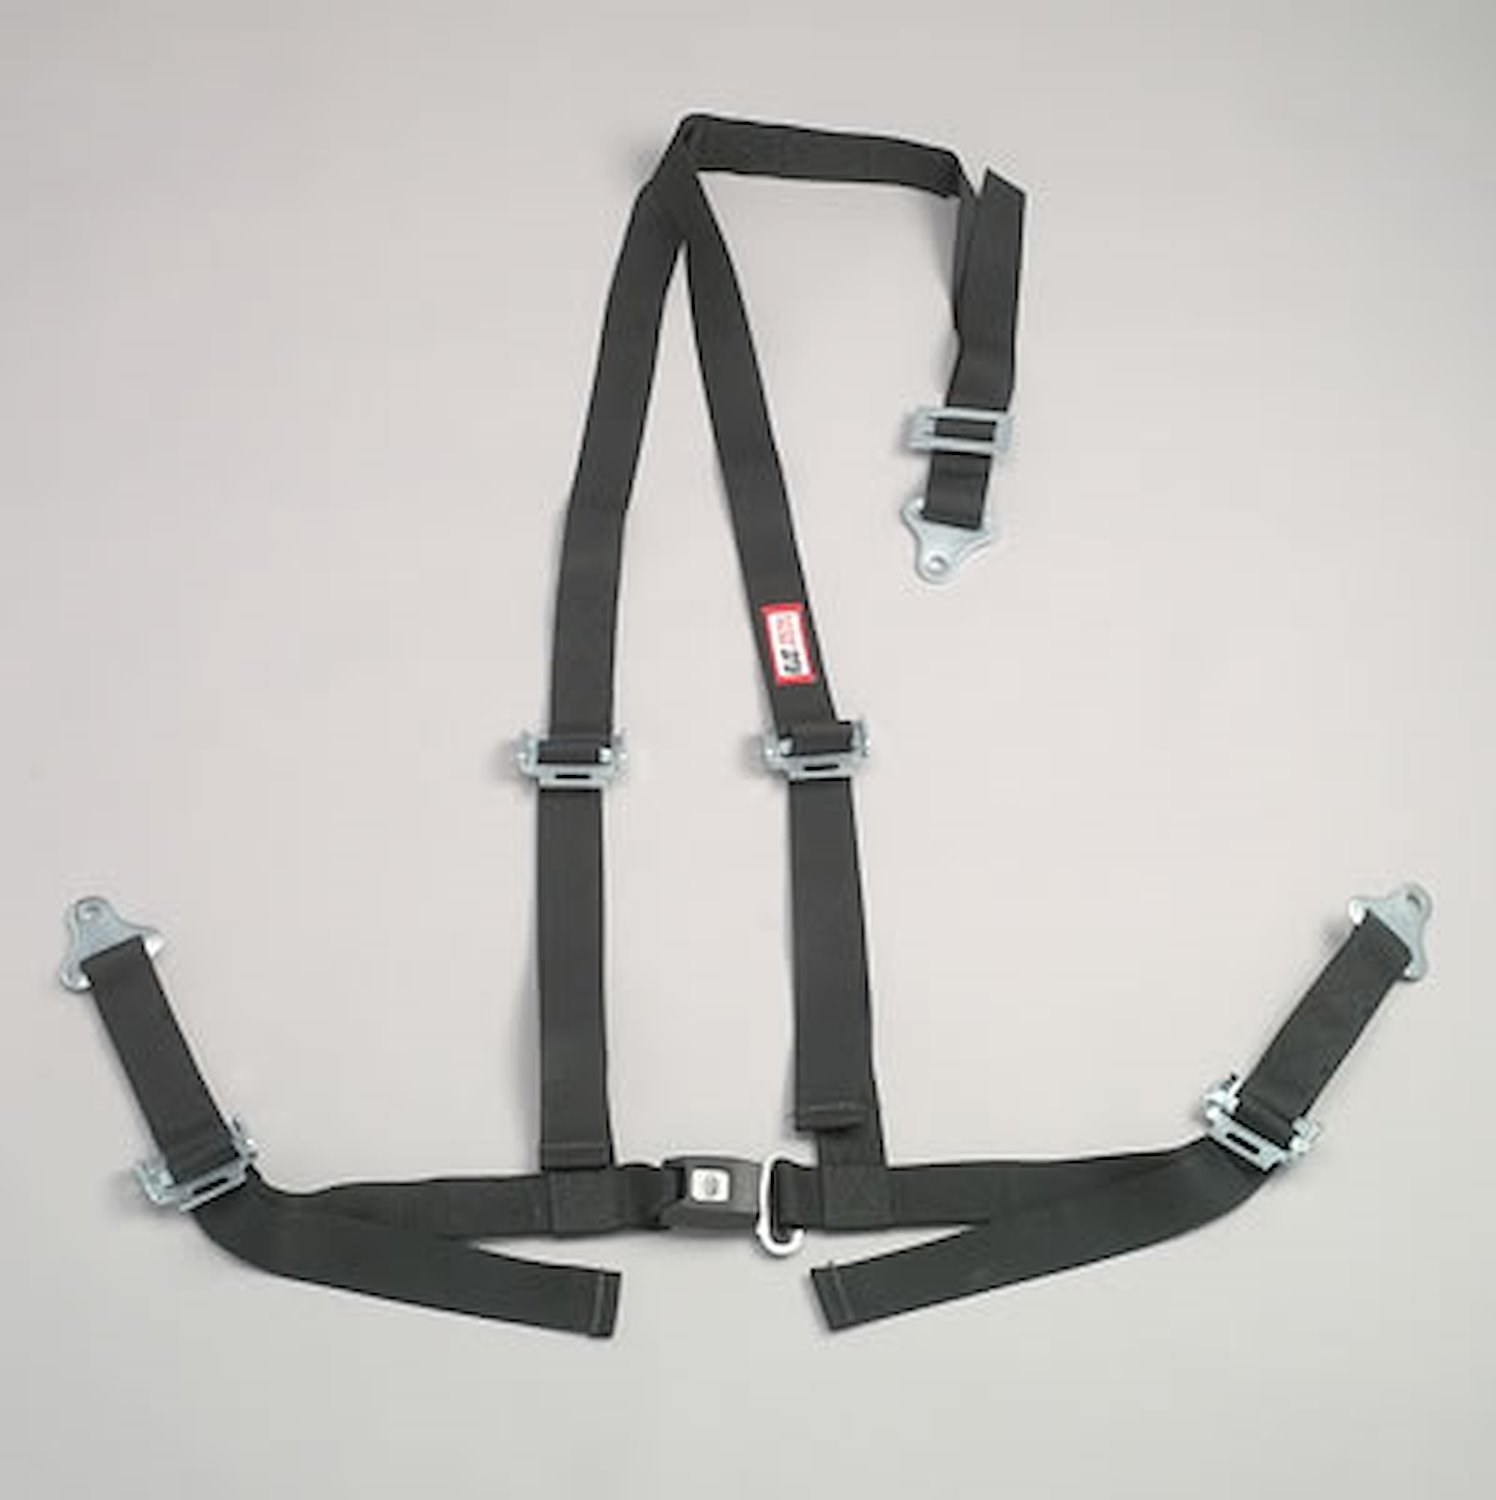 NON-SFI B&T HARNESS 2 PULL UP Lap Belt 2 S. H. V ROLL BAR Mount ALL WRAP ENDS GRAY